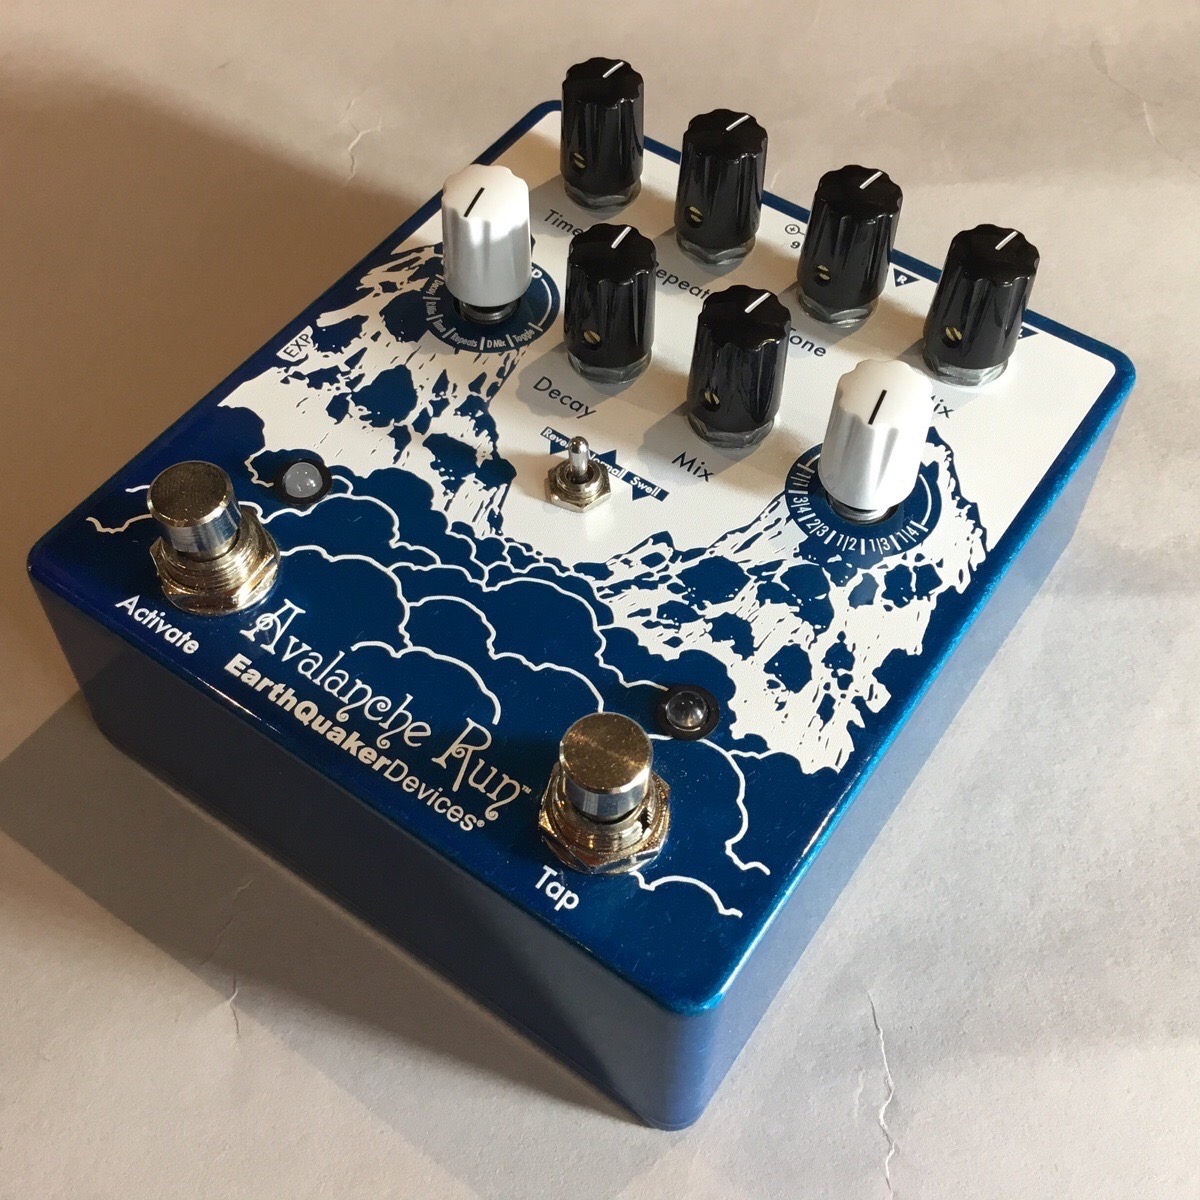 EarthQuaker Devices Avalanche Run コンパクトエフェクター ステレオディレイ＆リバーブ アースクエイカー